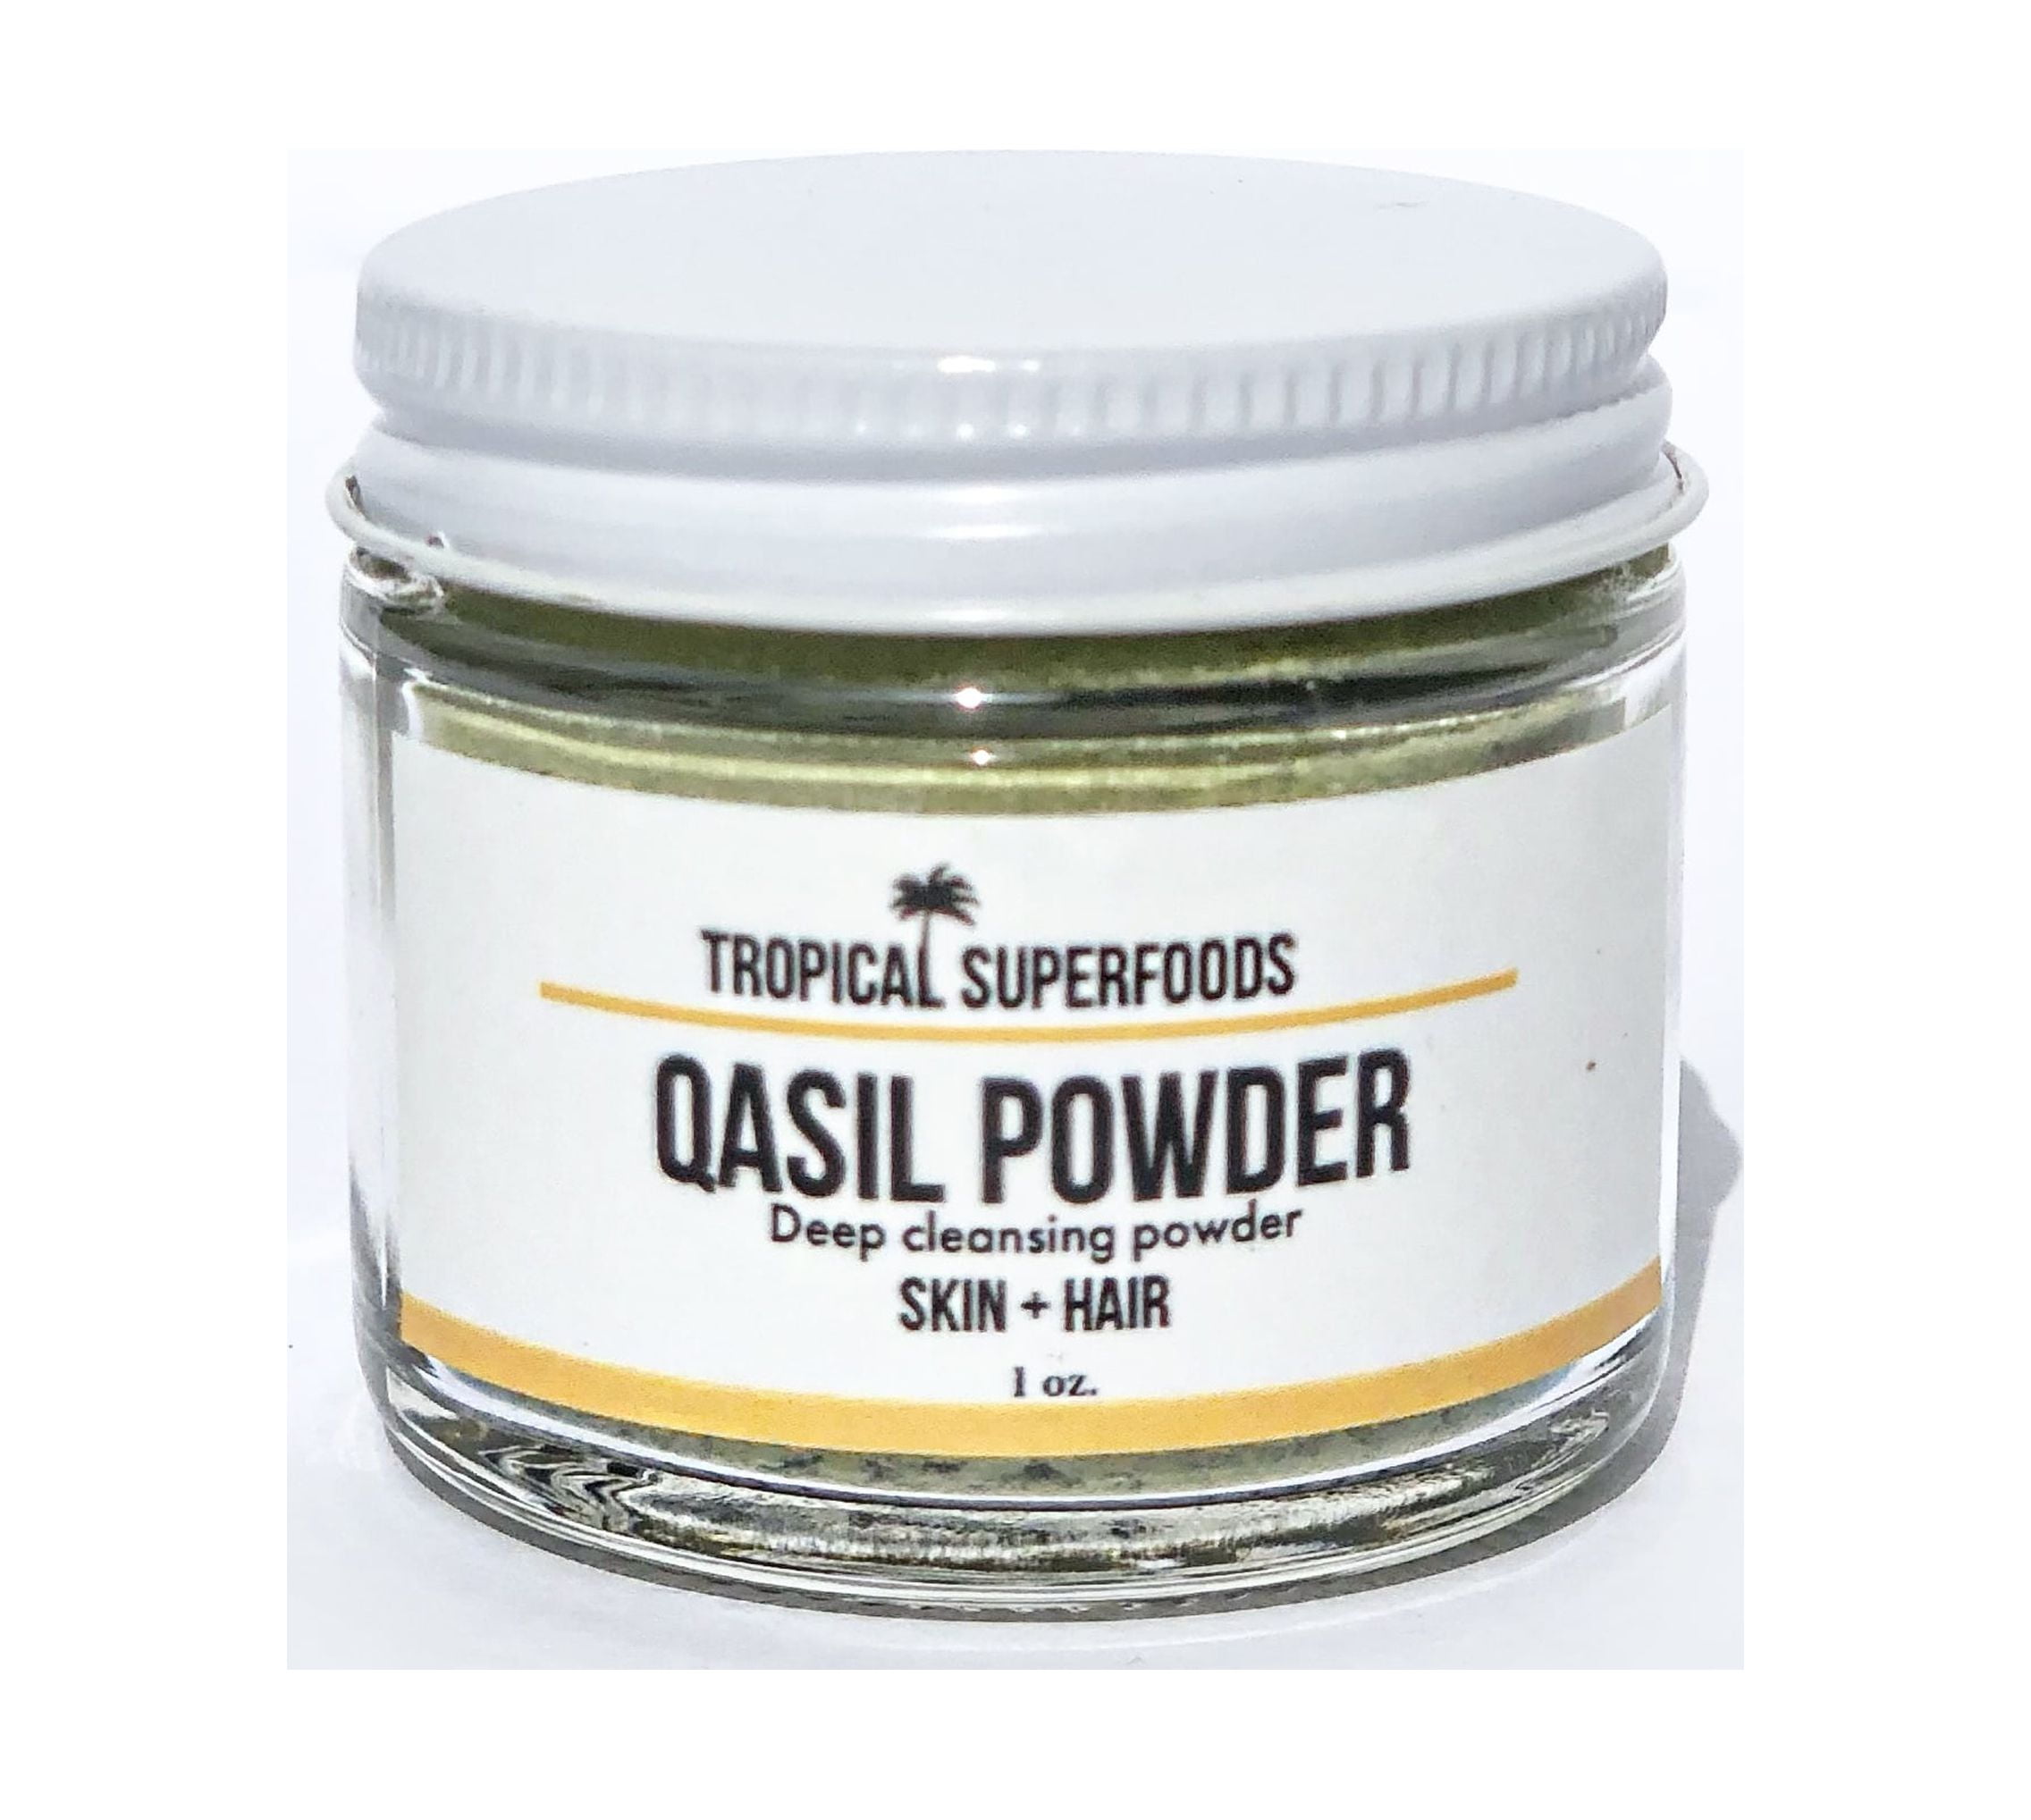 QASIL POWDER AND ITS BENEFITS FOR YOUR SKIN AND HAIR – SENSEOFREASONS